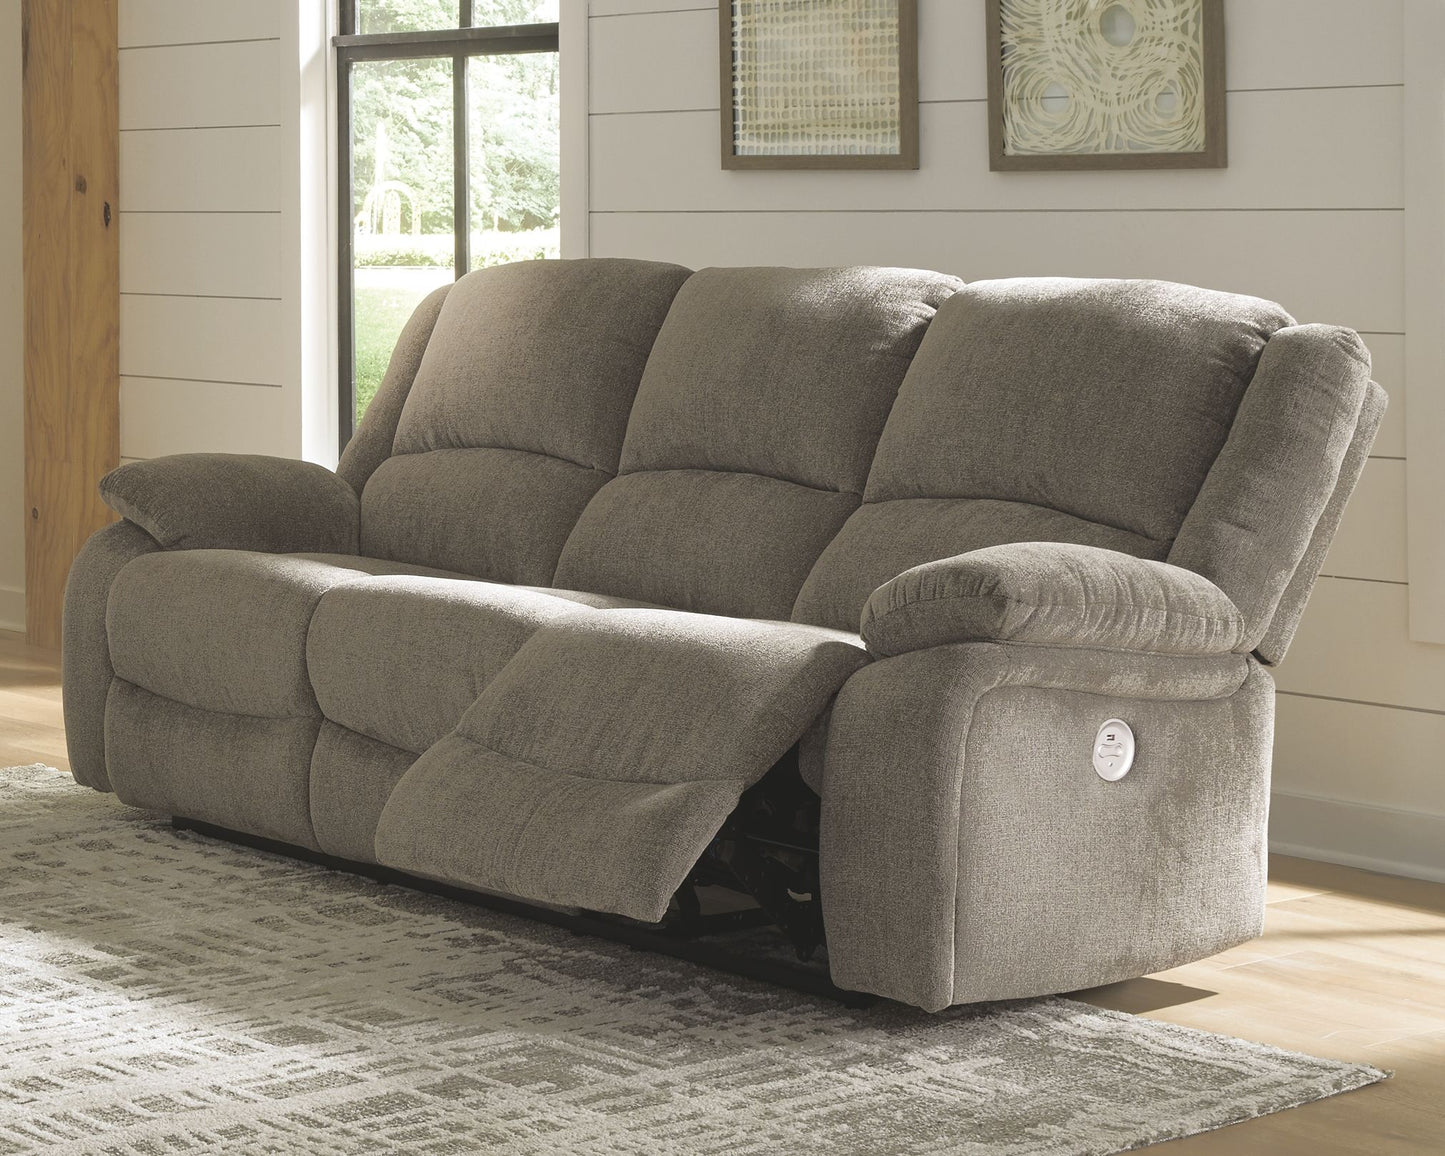 Draycoll - Pewter - Reclining Power Sofa